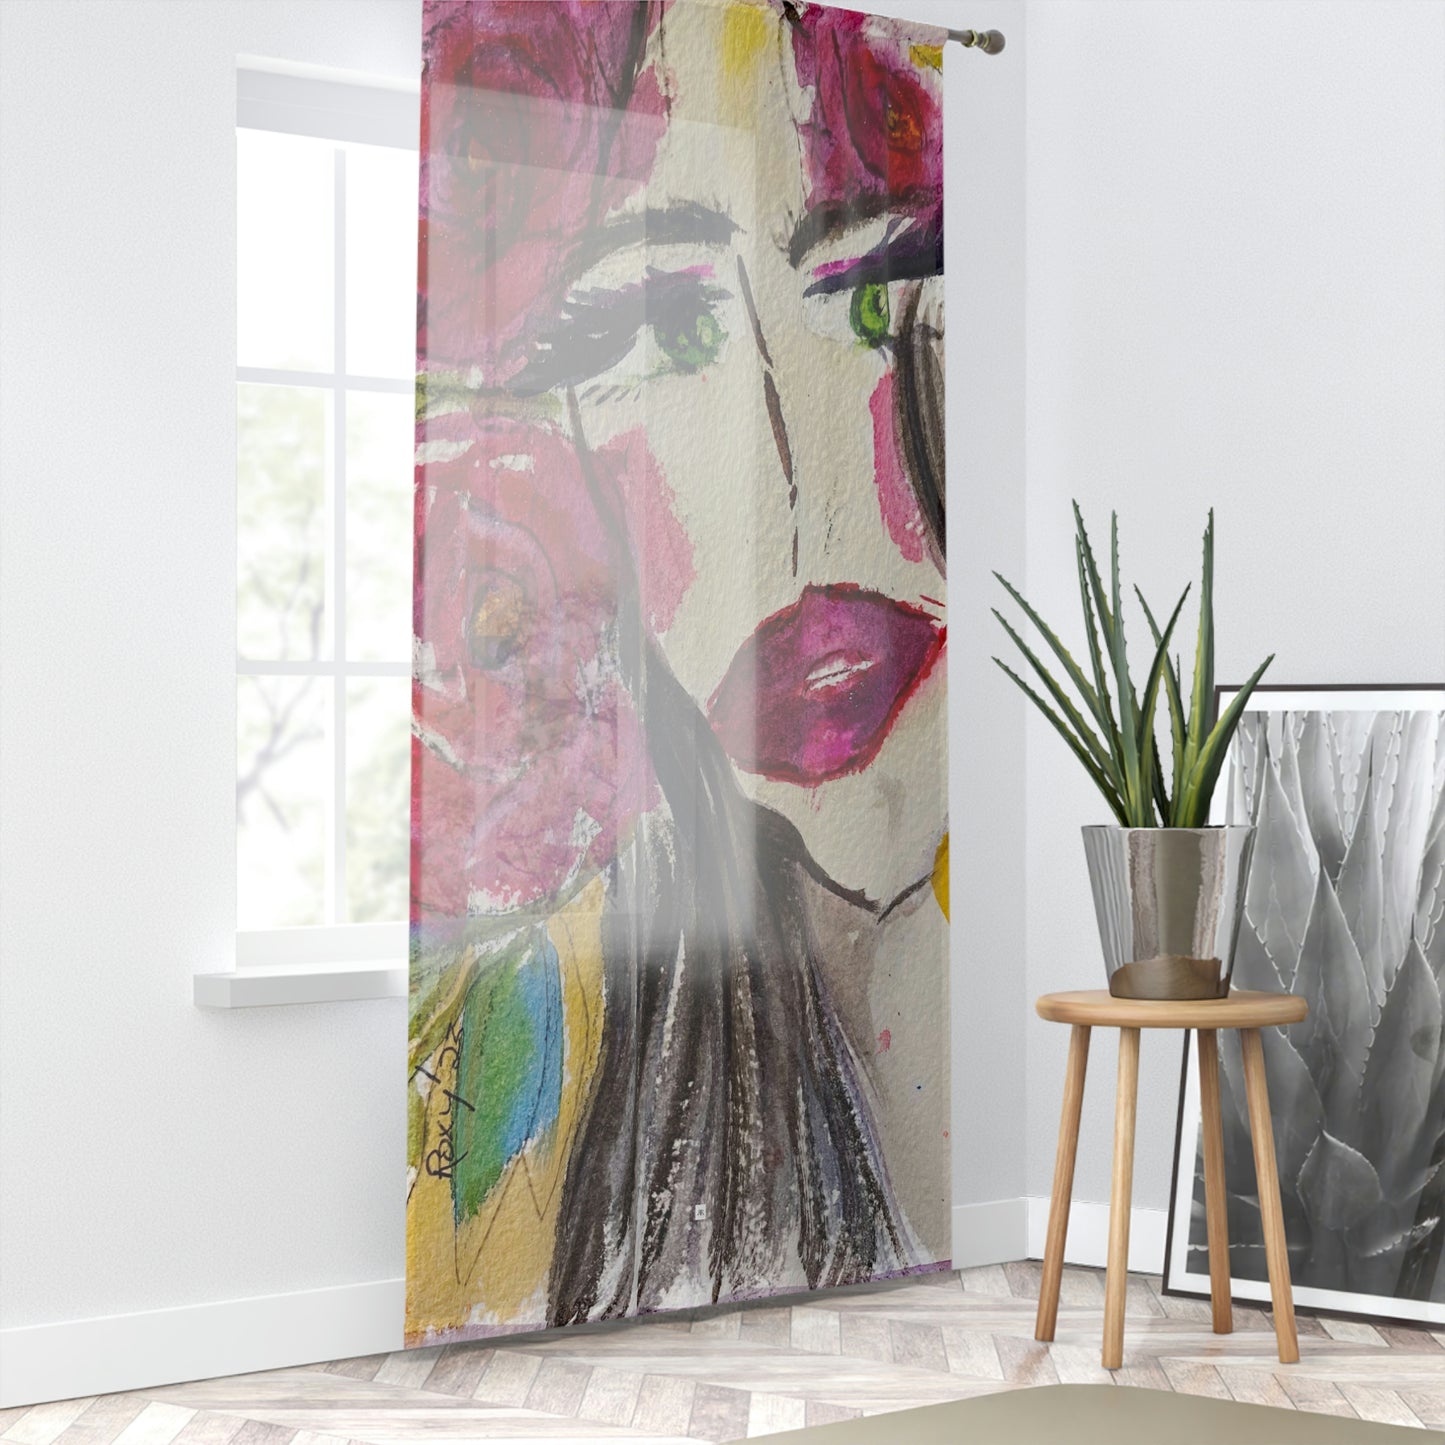 Pretty Interested Brunette with Big Lips "Uh-huh" 84 x 50 inch Sheer Window Curtain